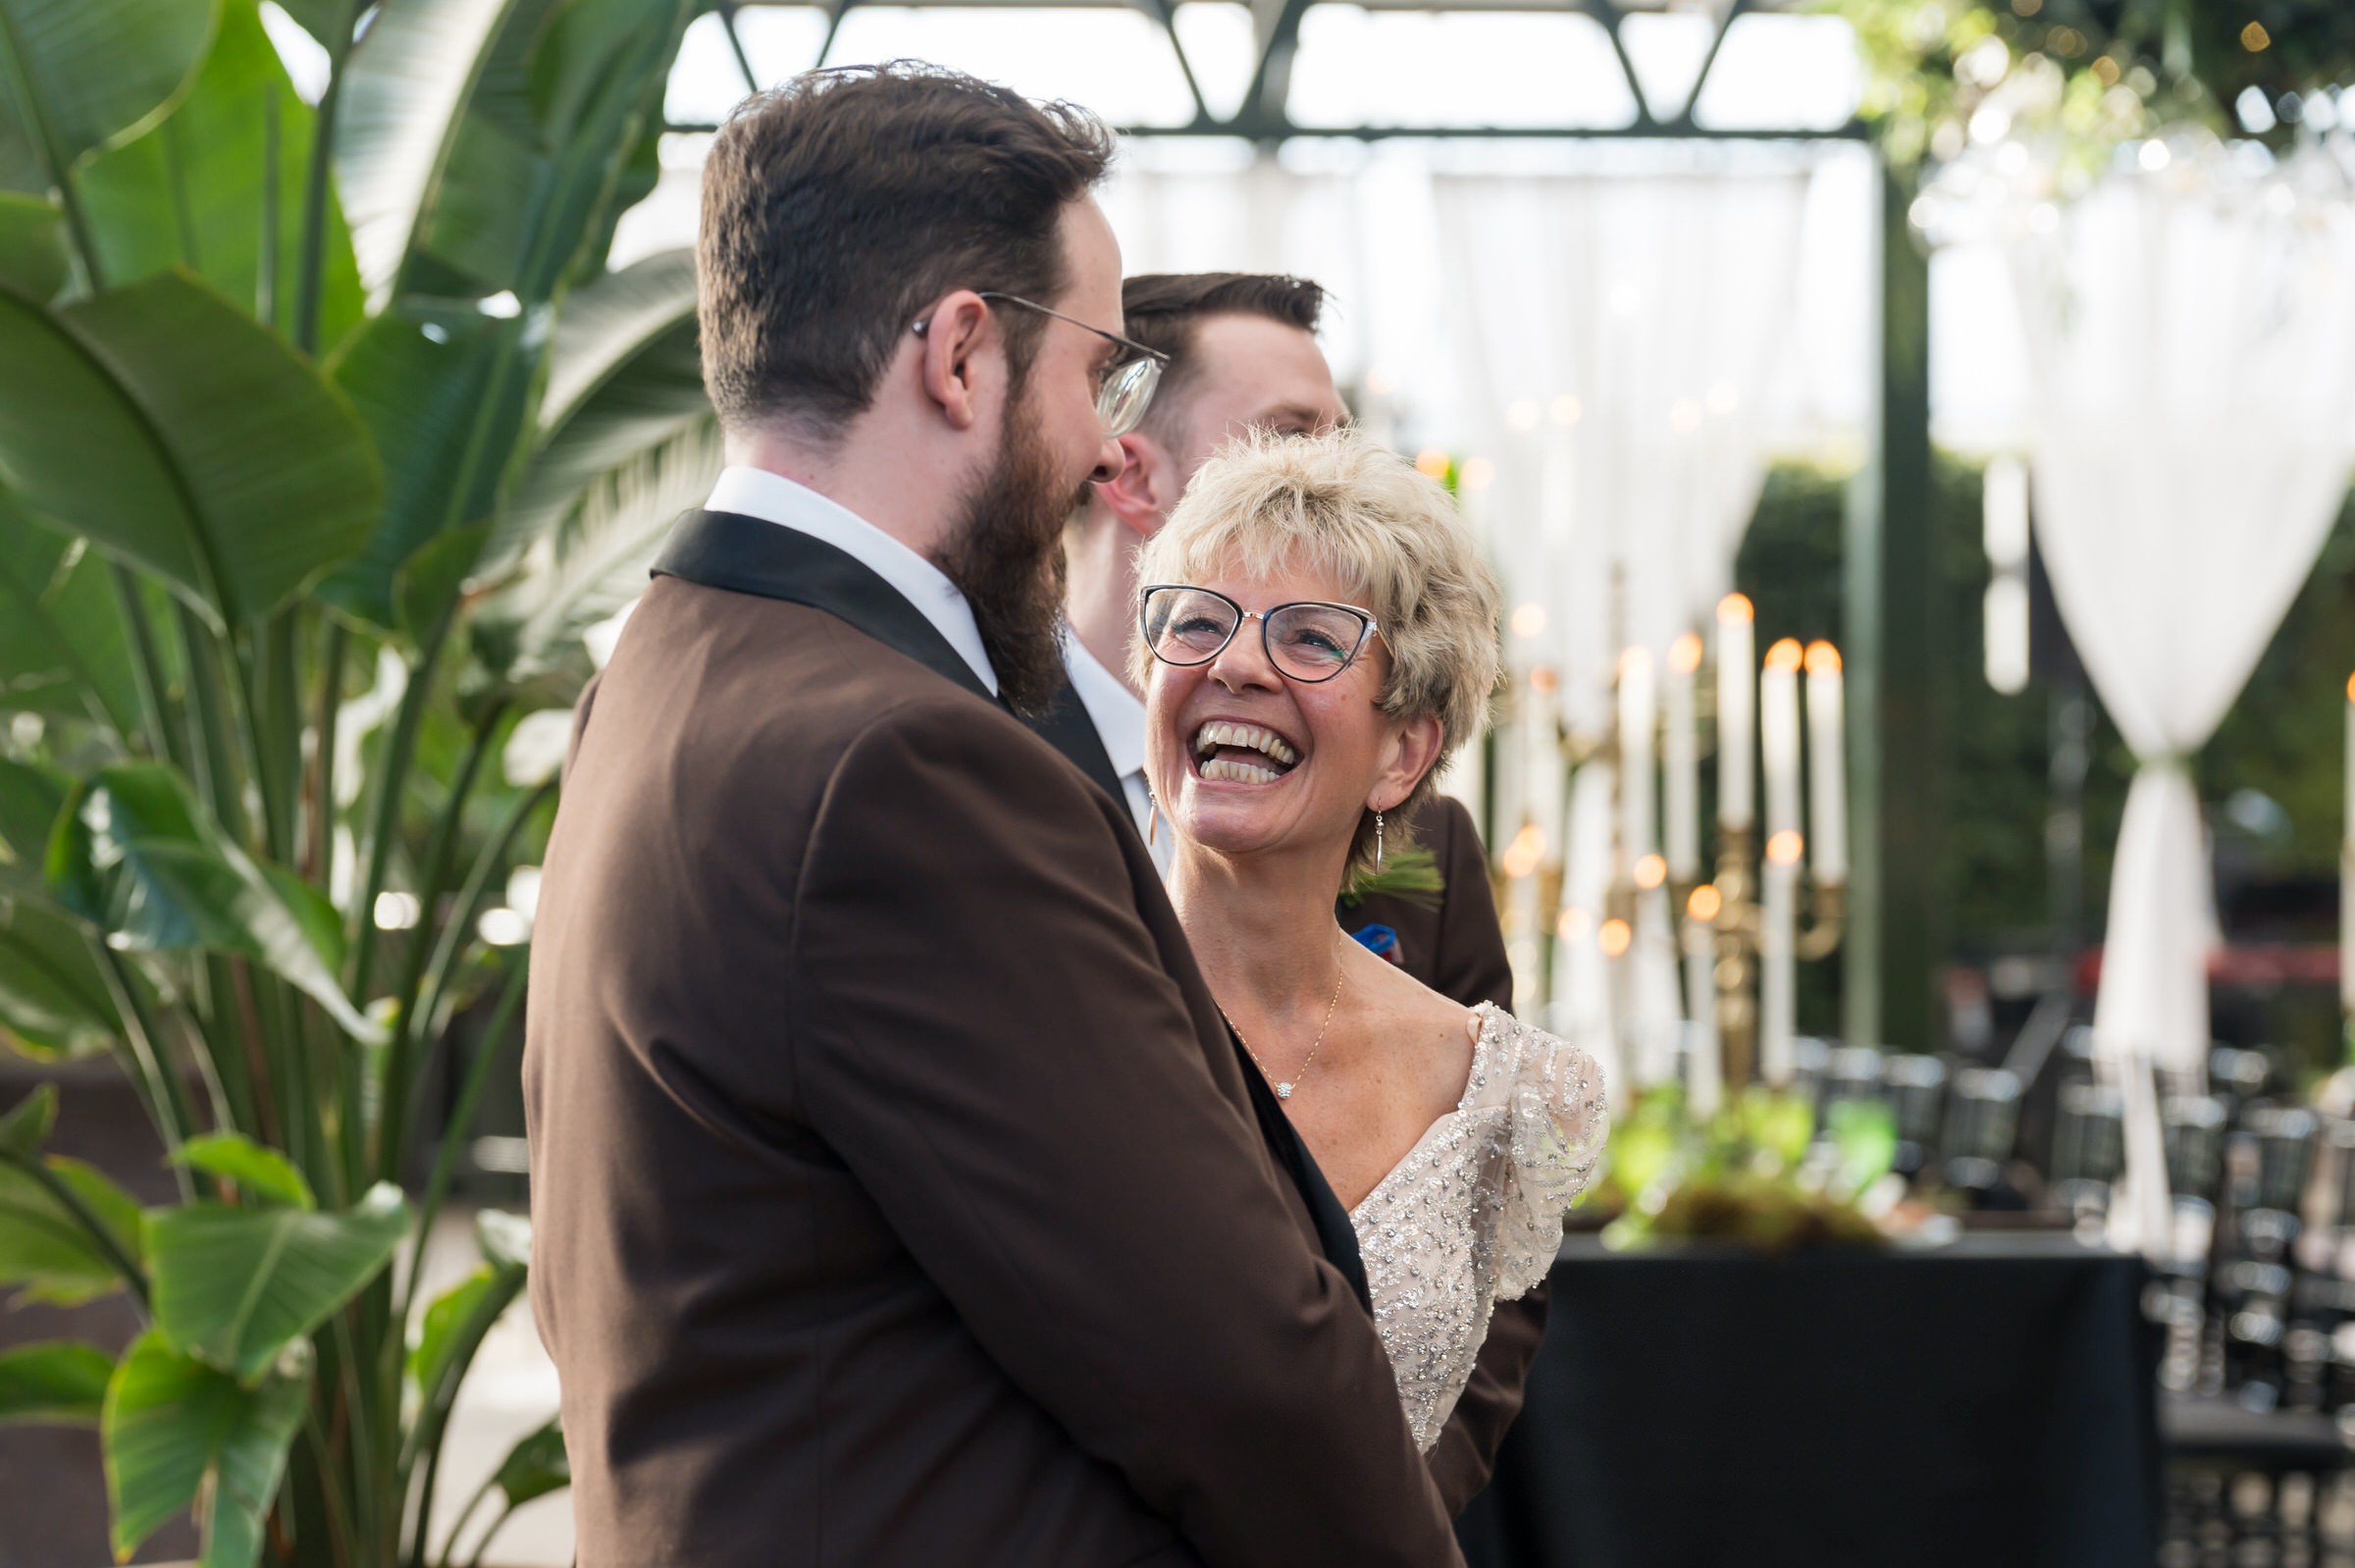 A mom reacts to seeing the bride walk down the aisle at her son's Planterra wedding.  